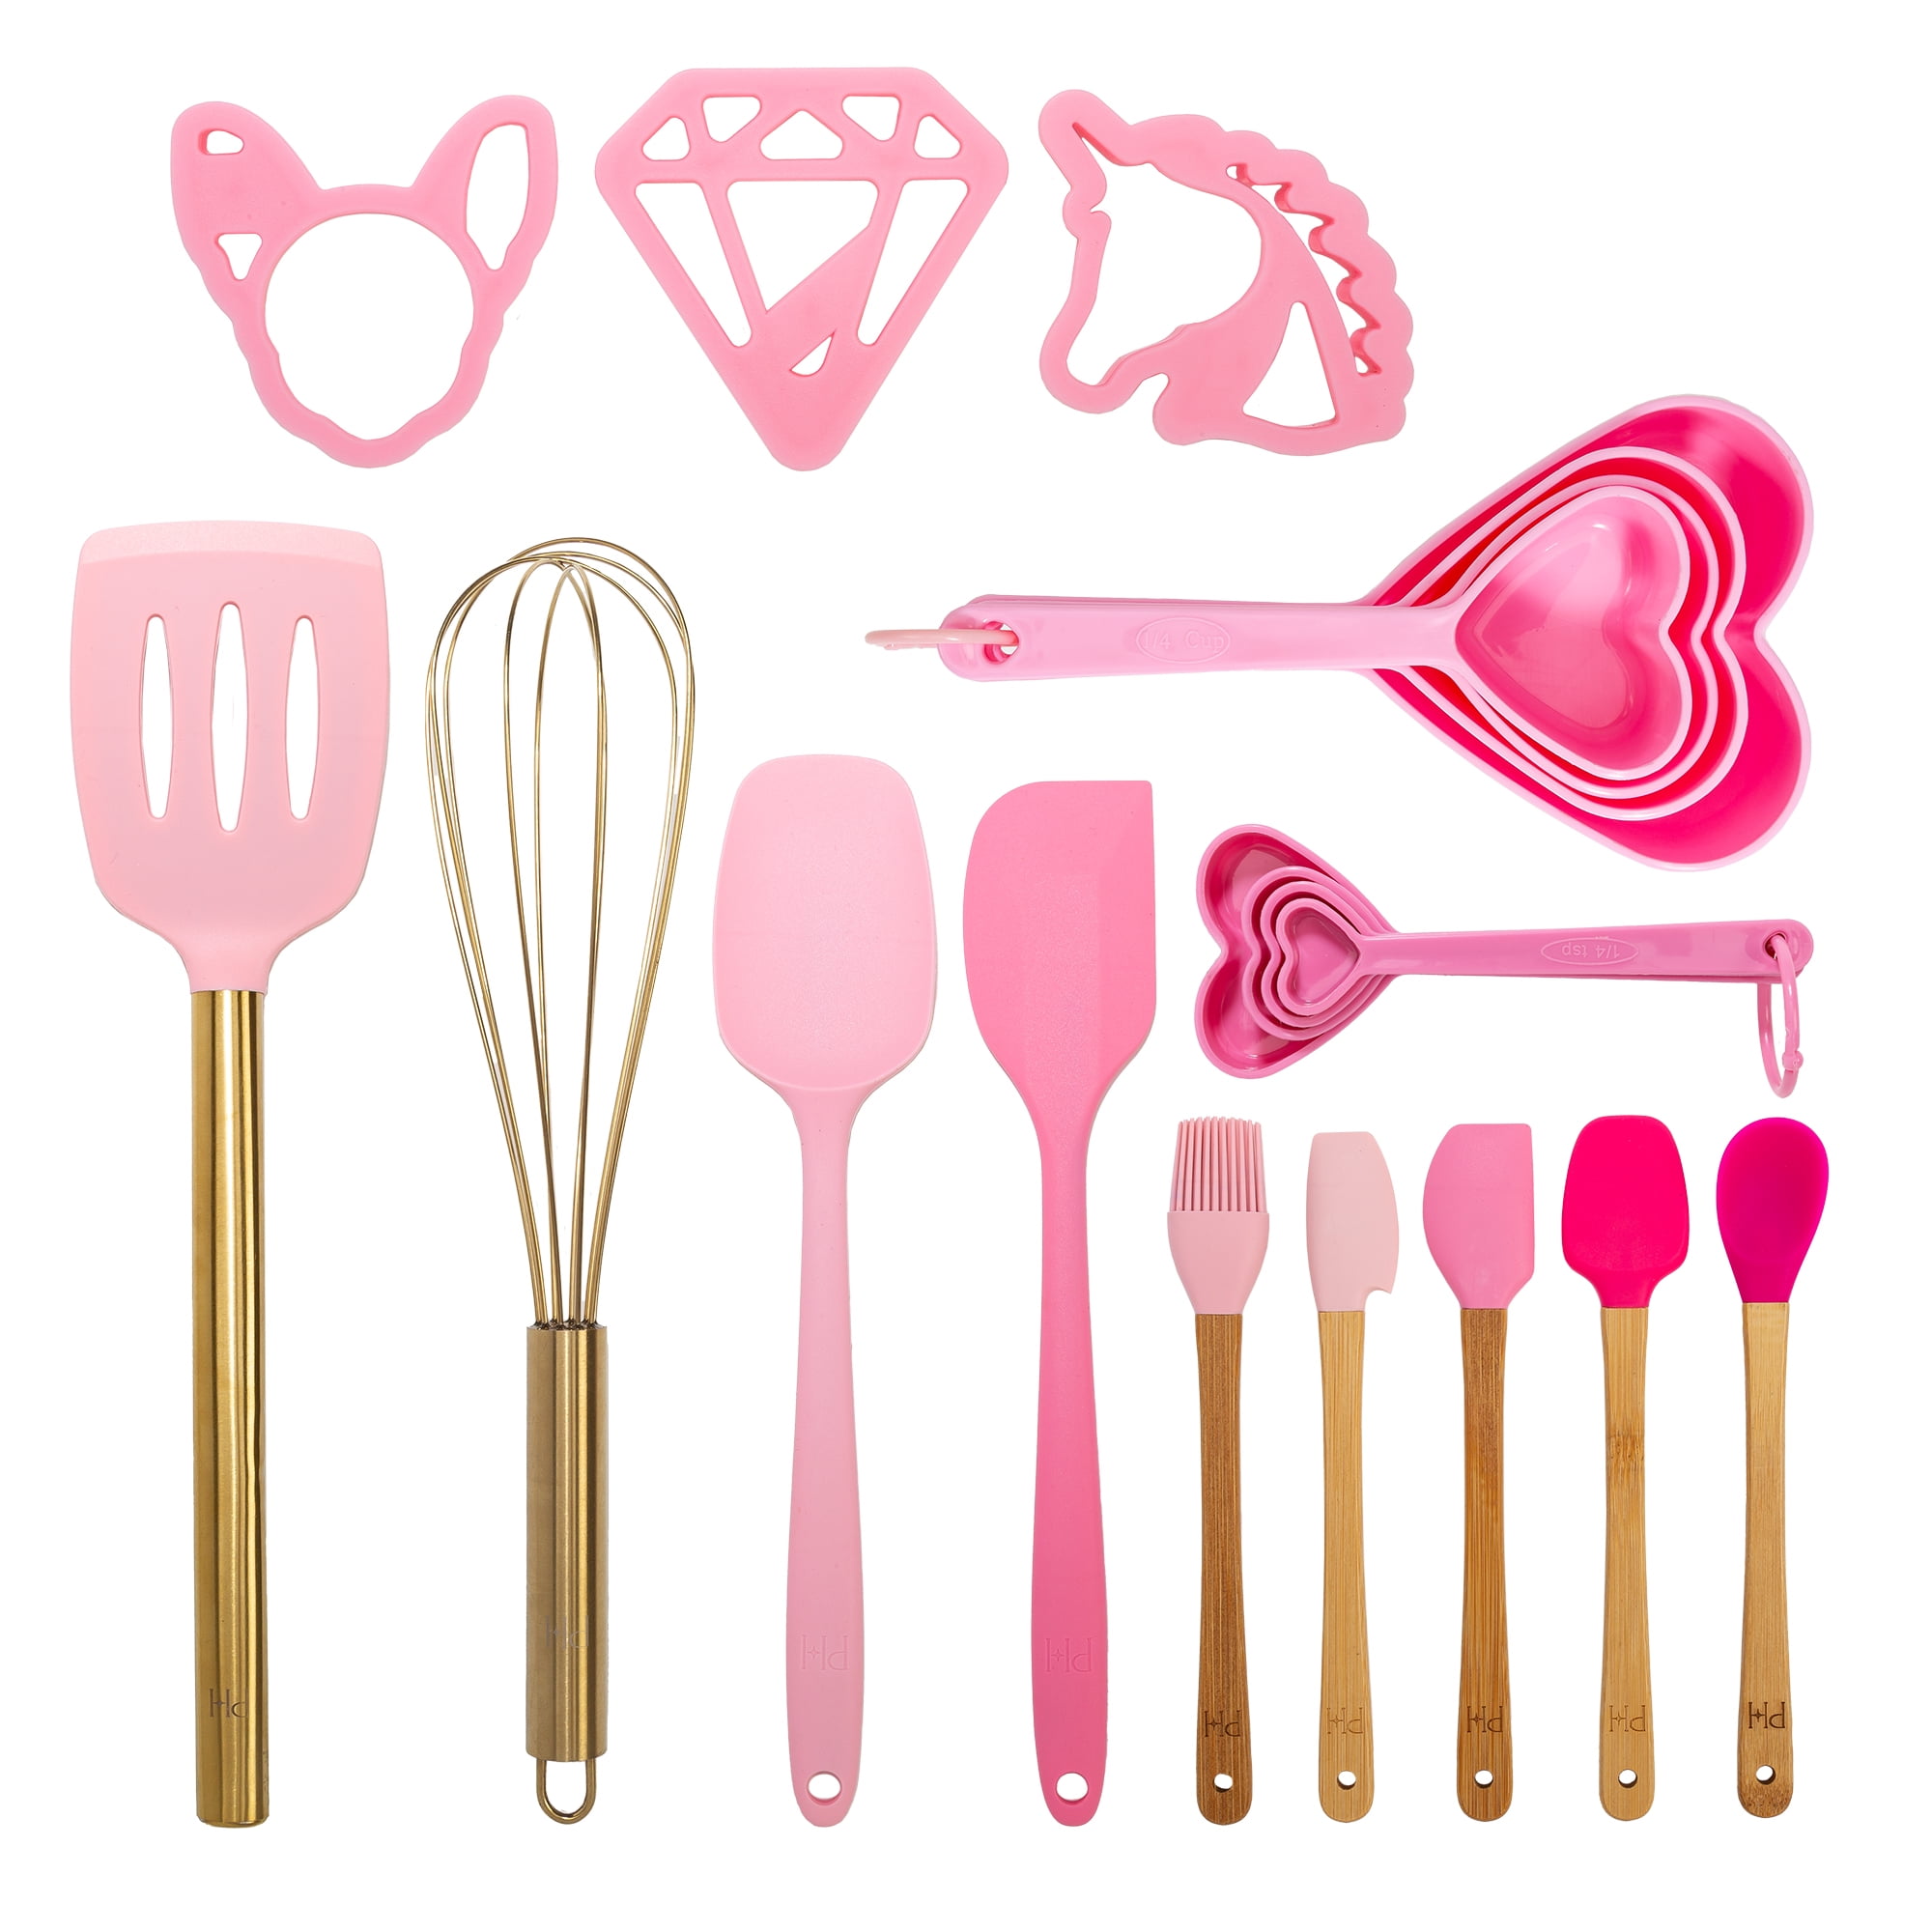 Paris Hilton Stainless Steel Pots and Pans Set with Stay-Cool Pink Handles,  Tempered Glass Lids, Bonus Heart Shaped Measuring Cups and Spoons